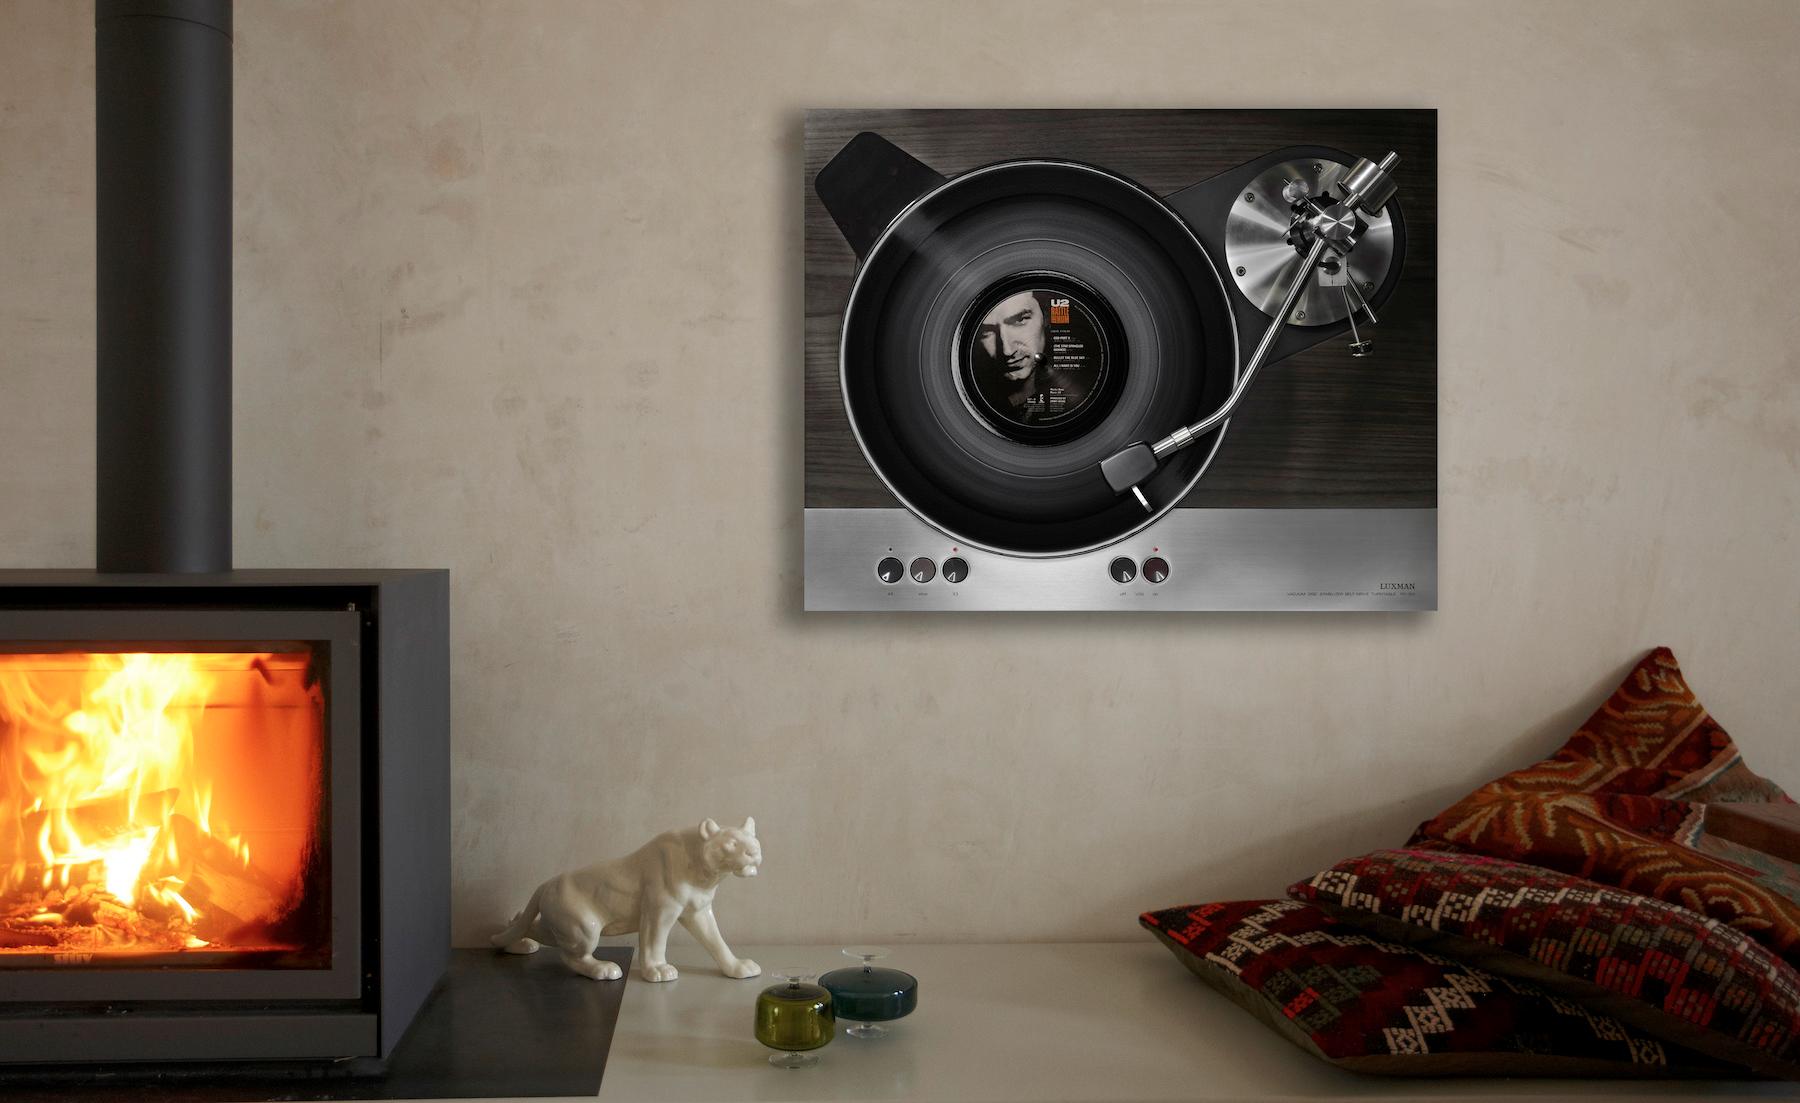 Bang & Olufsen Beogram 1800, Kate Bush - Running up that hill, World Records (Photograph)
Edition of 3
Mounted on Plexiglas
Framed

Kai Schäfer is an acclaimed German photographer with a passion for vinyl records and iconic turntables. The World